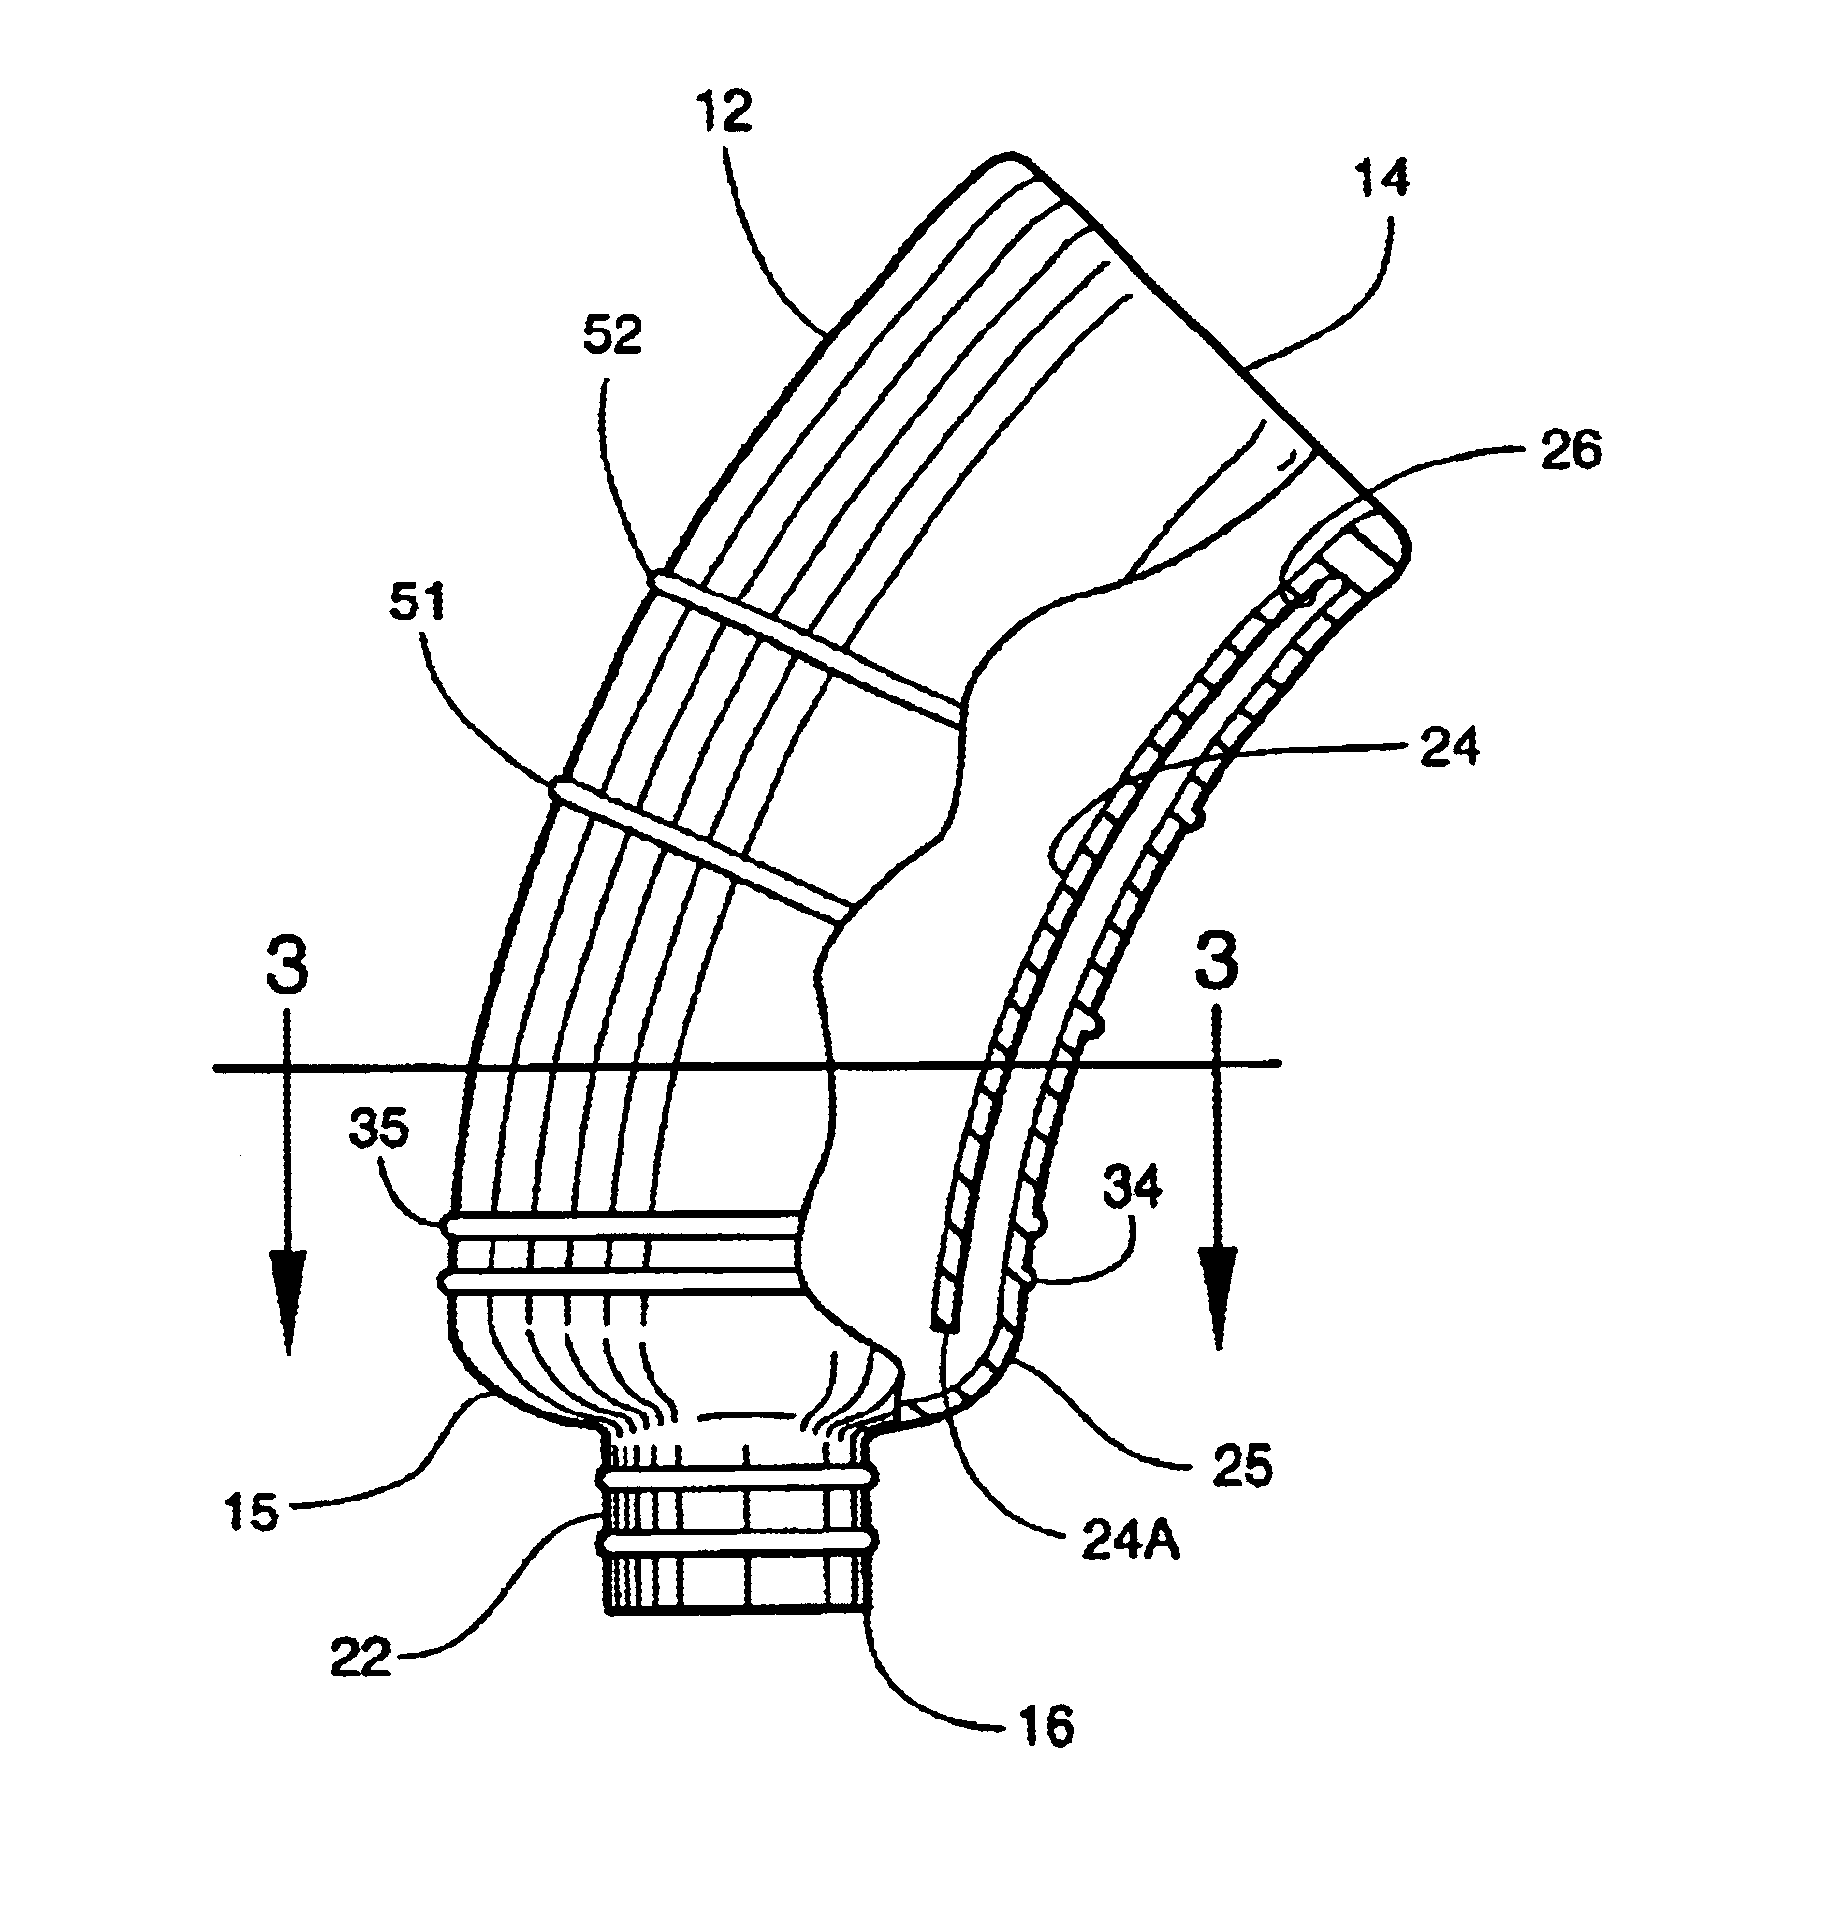 Male incontinence device